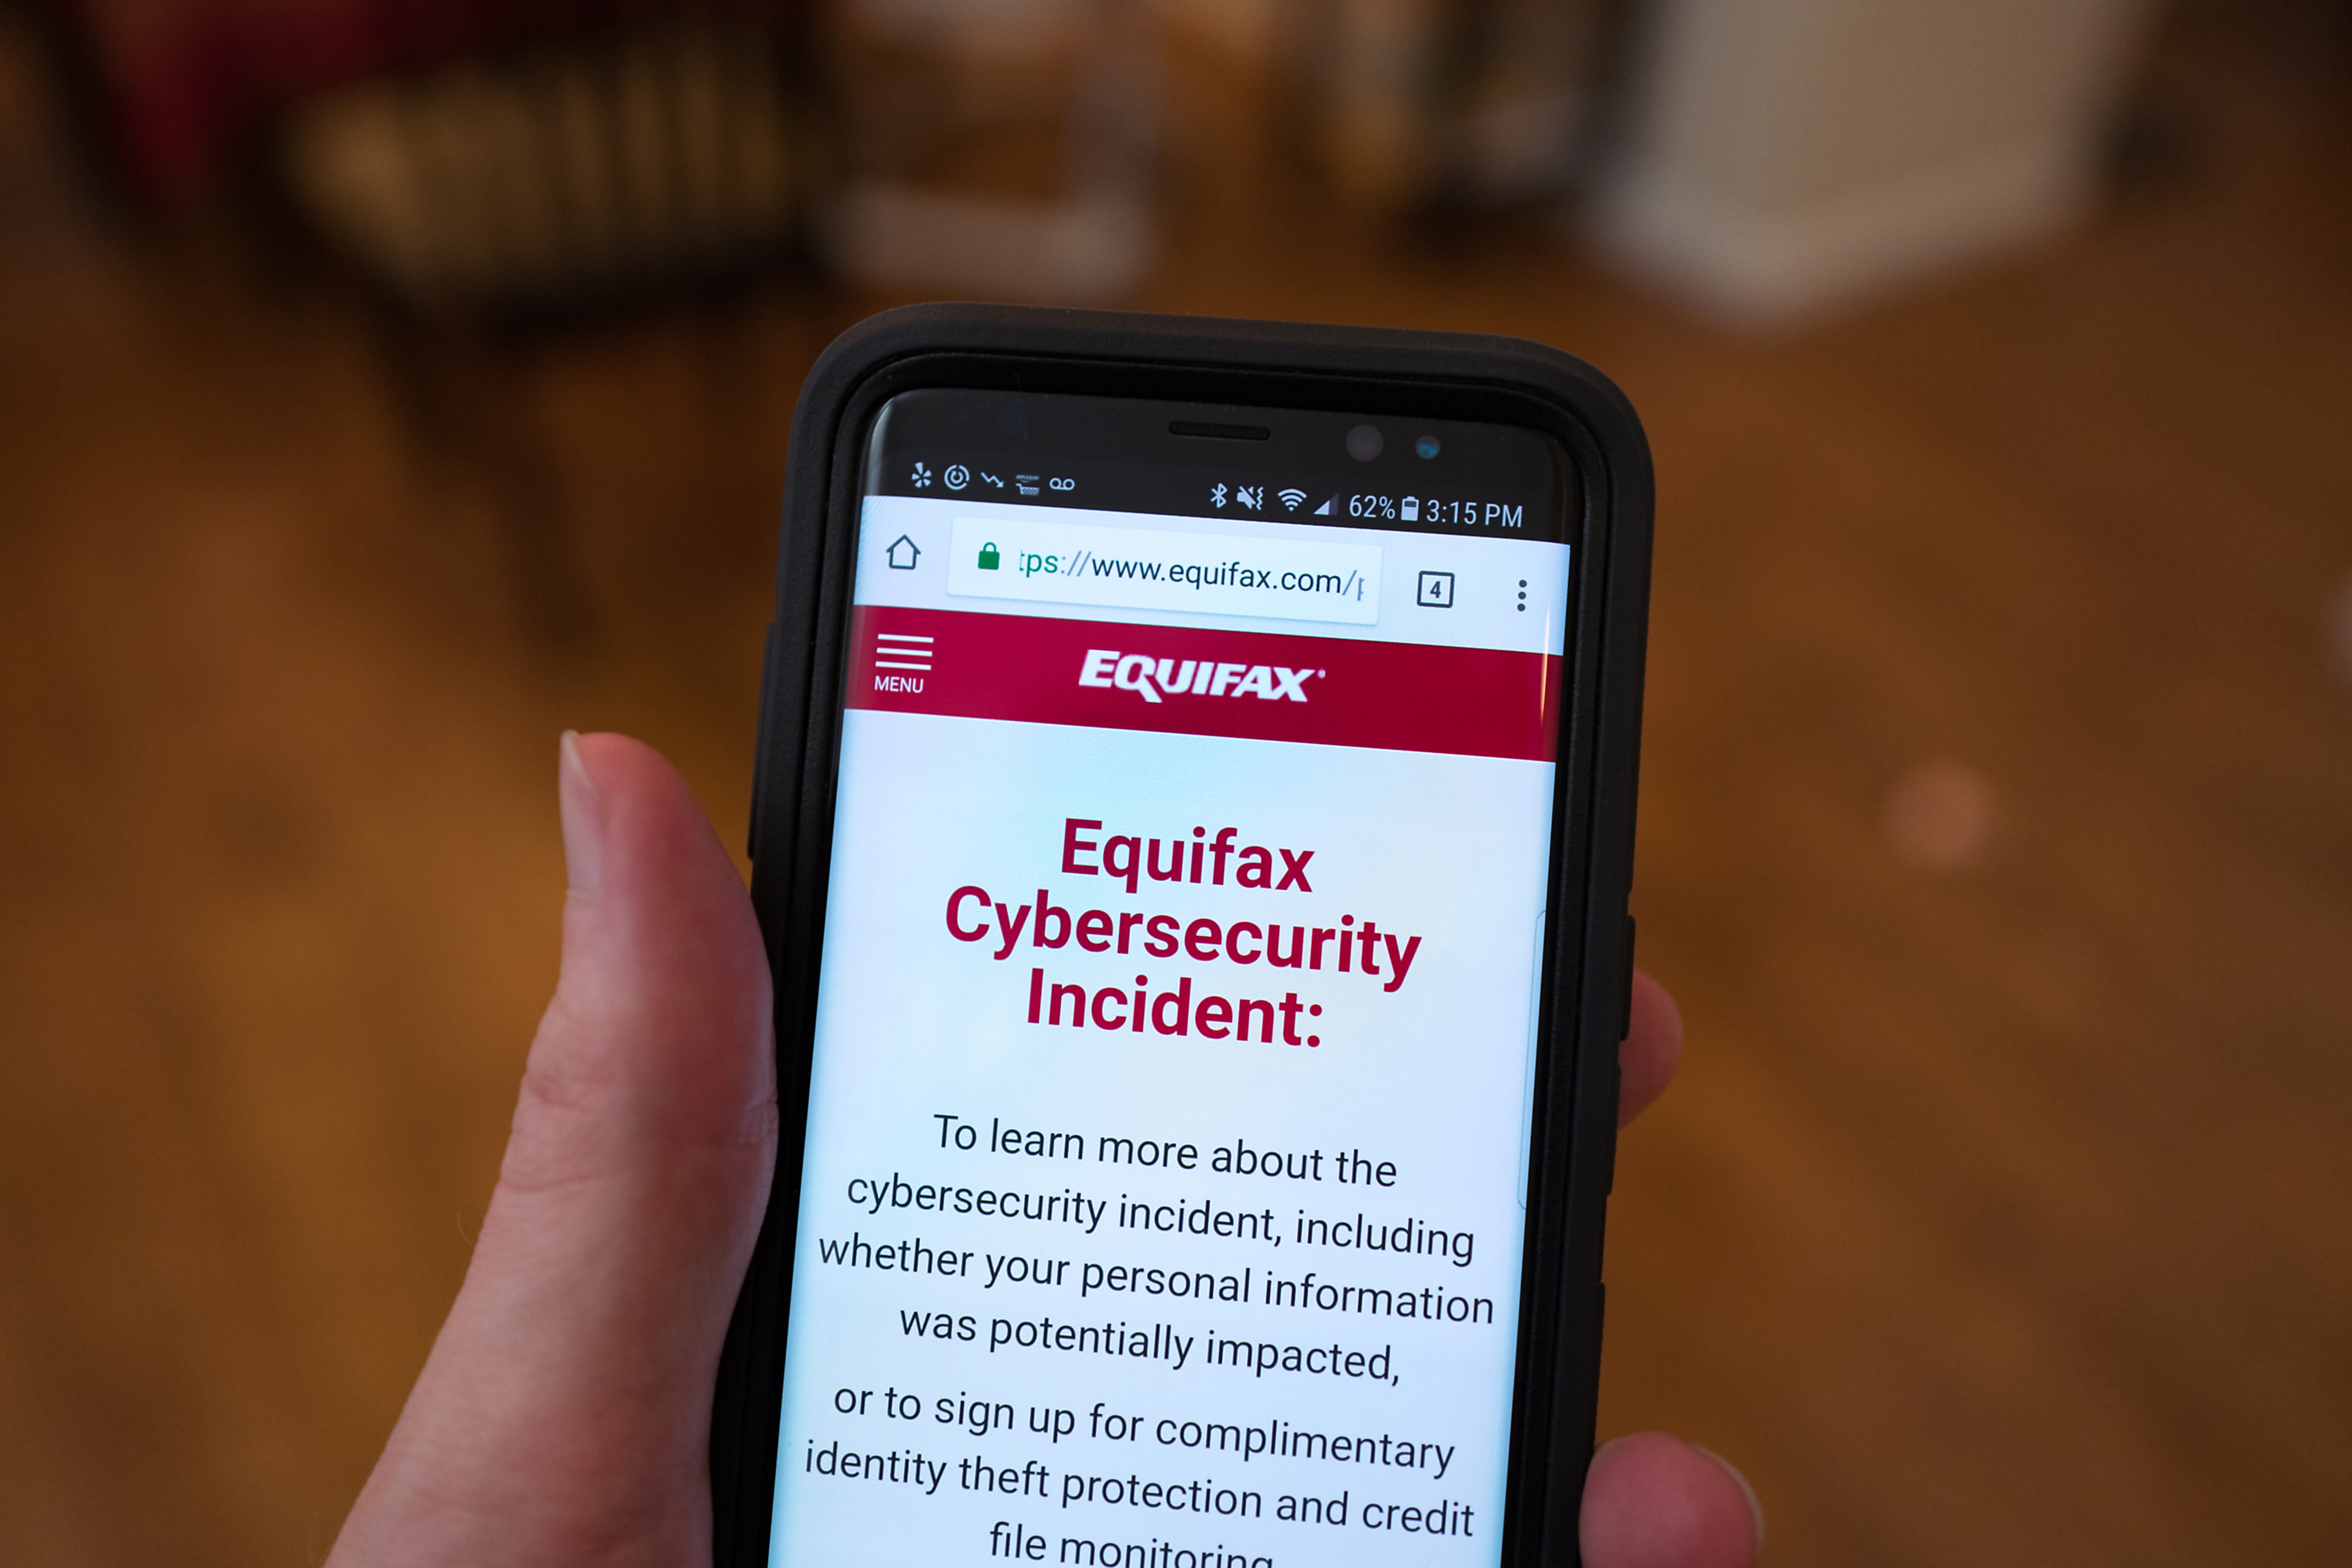 Equifax settlement you need to update your claim to get 125